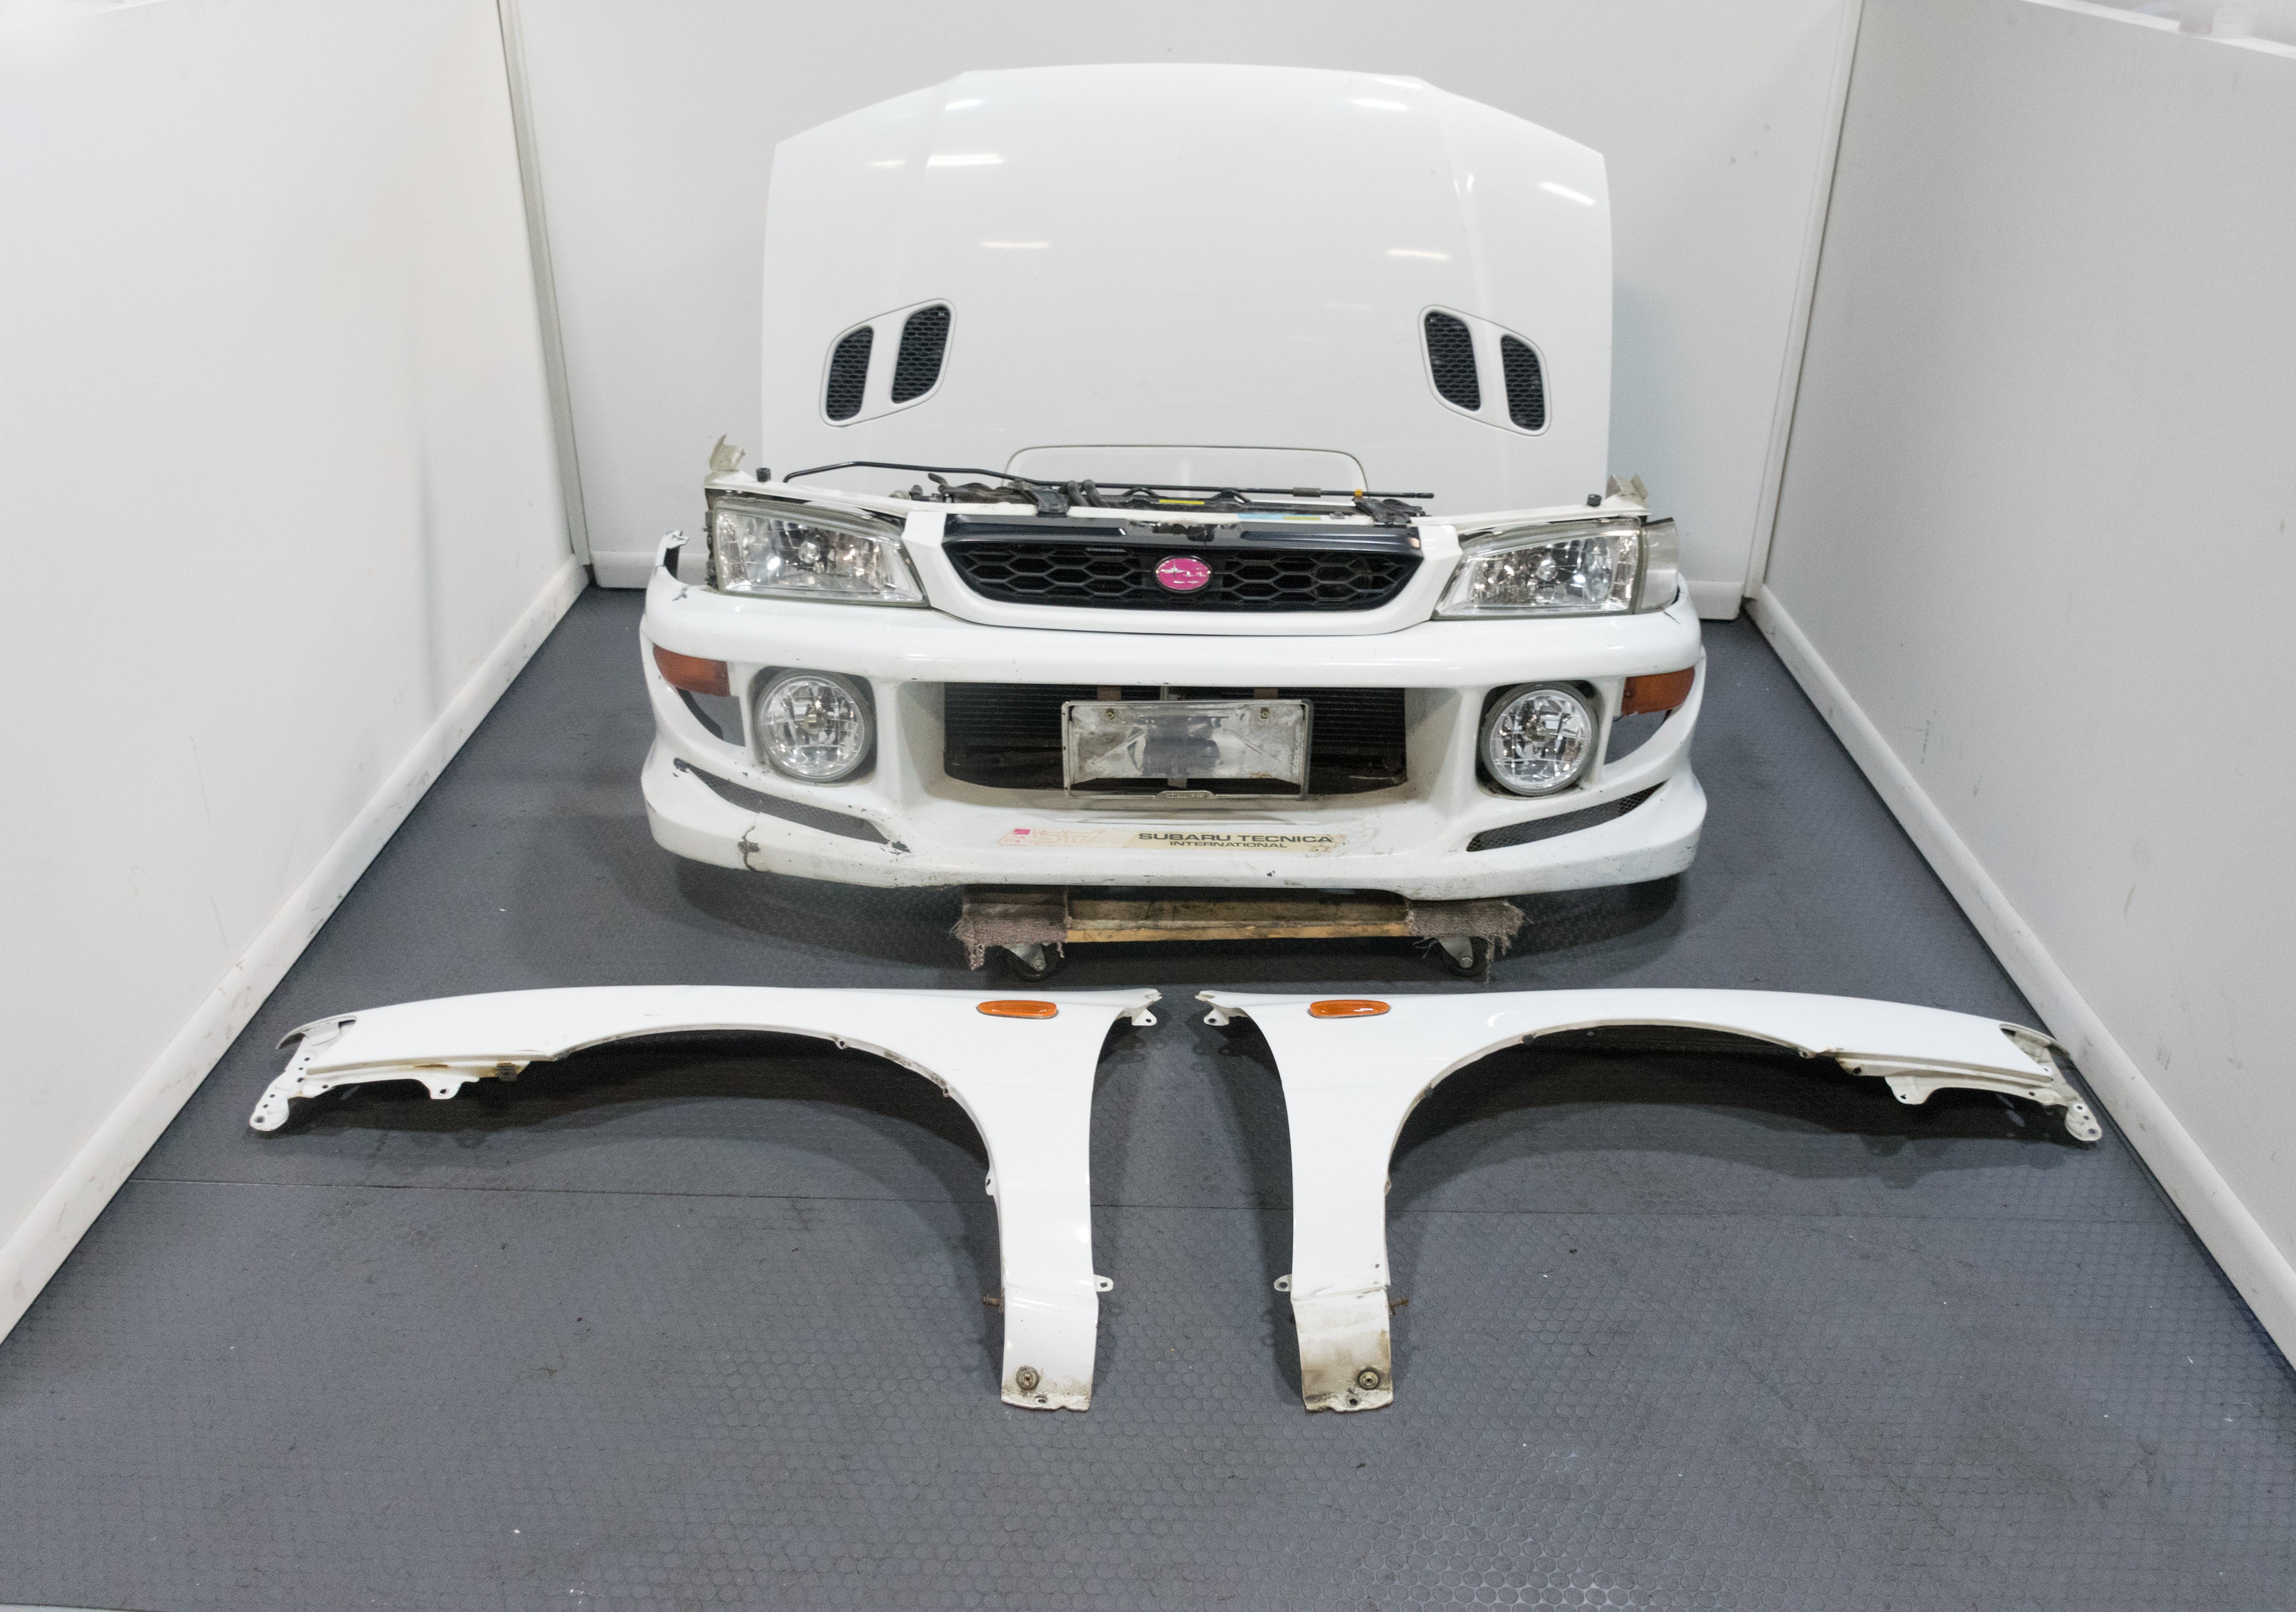 Subaru Impreza GC8 STi Front End with Fog Lights and Aftermarket Bumper